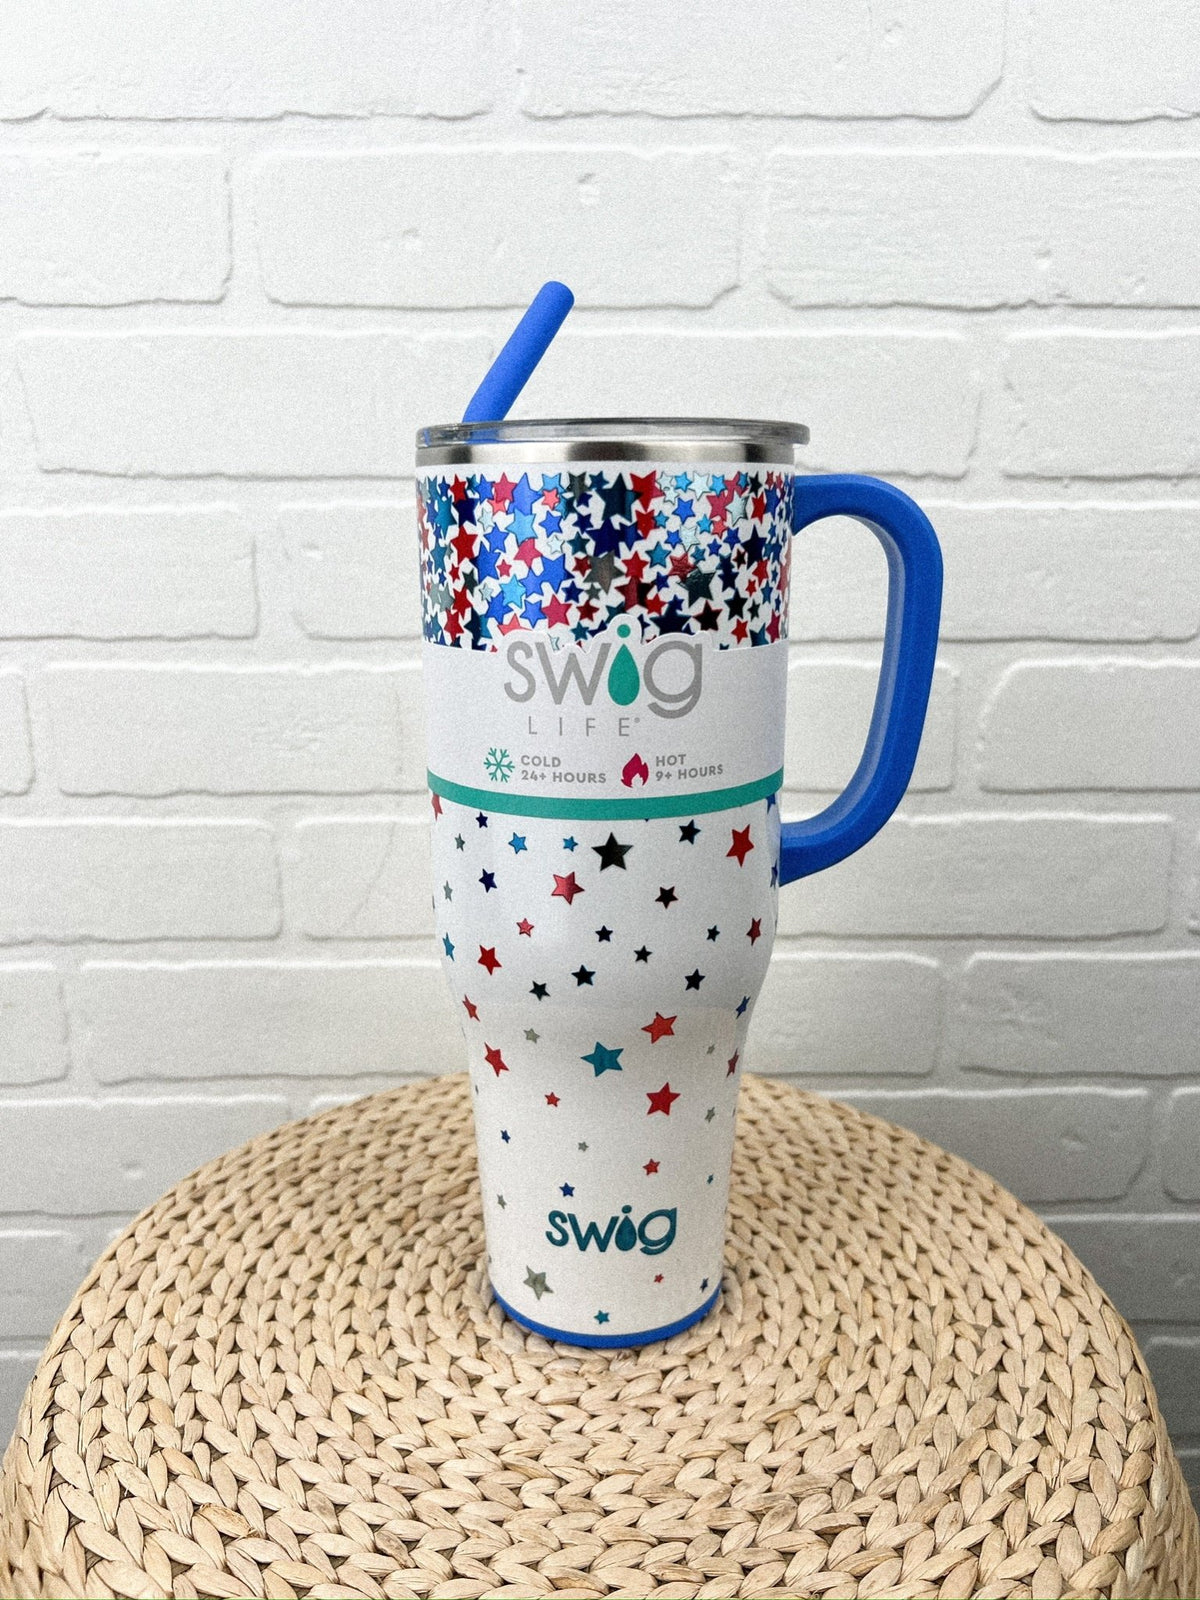 Swig Star Spangled 40oz tumbler - Trendy Cup - Cute American Summer Collection at Lush Fashion Lounge Boutique in Oklahoma City